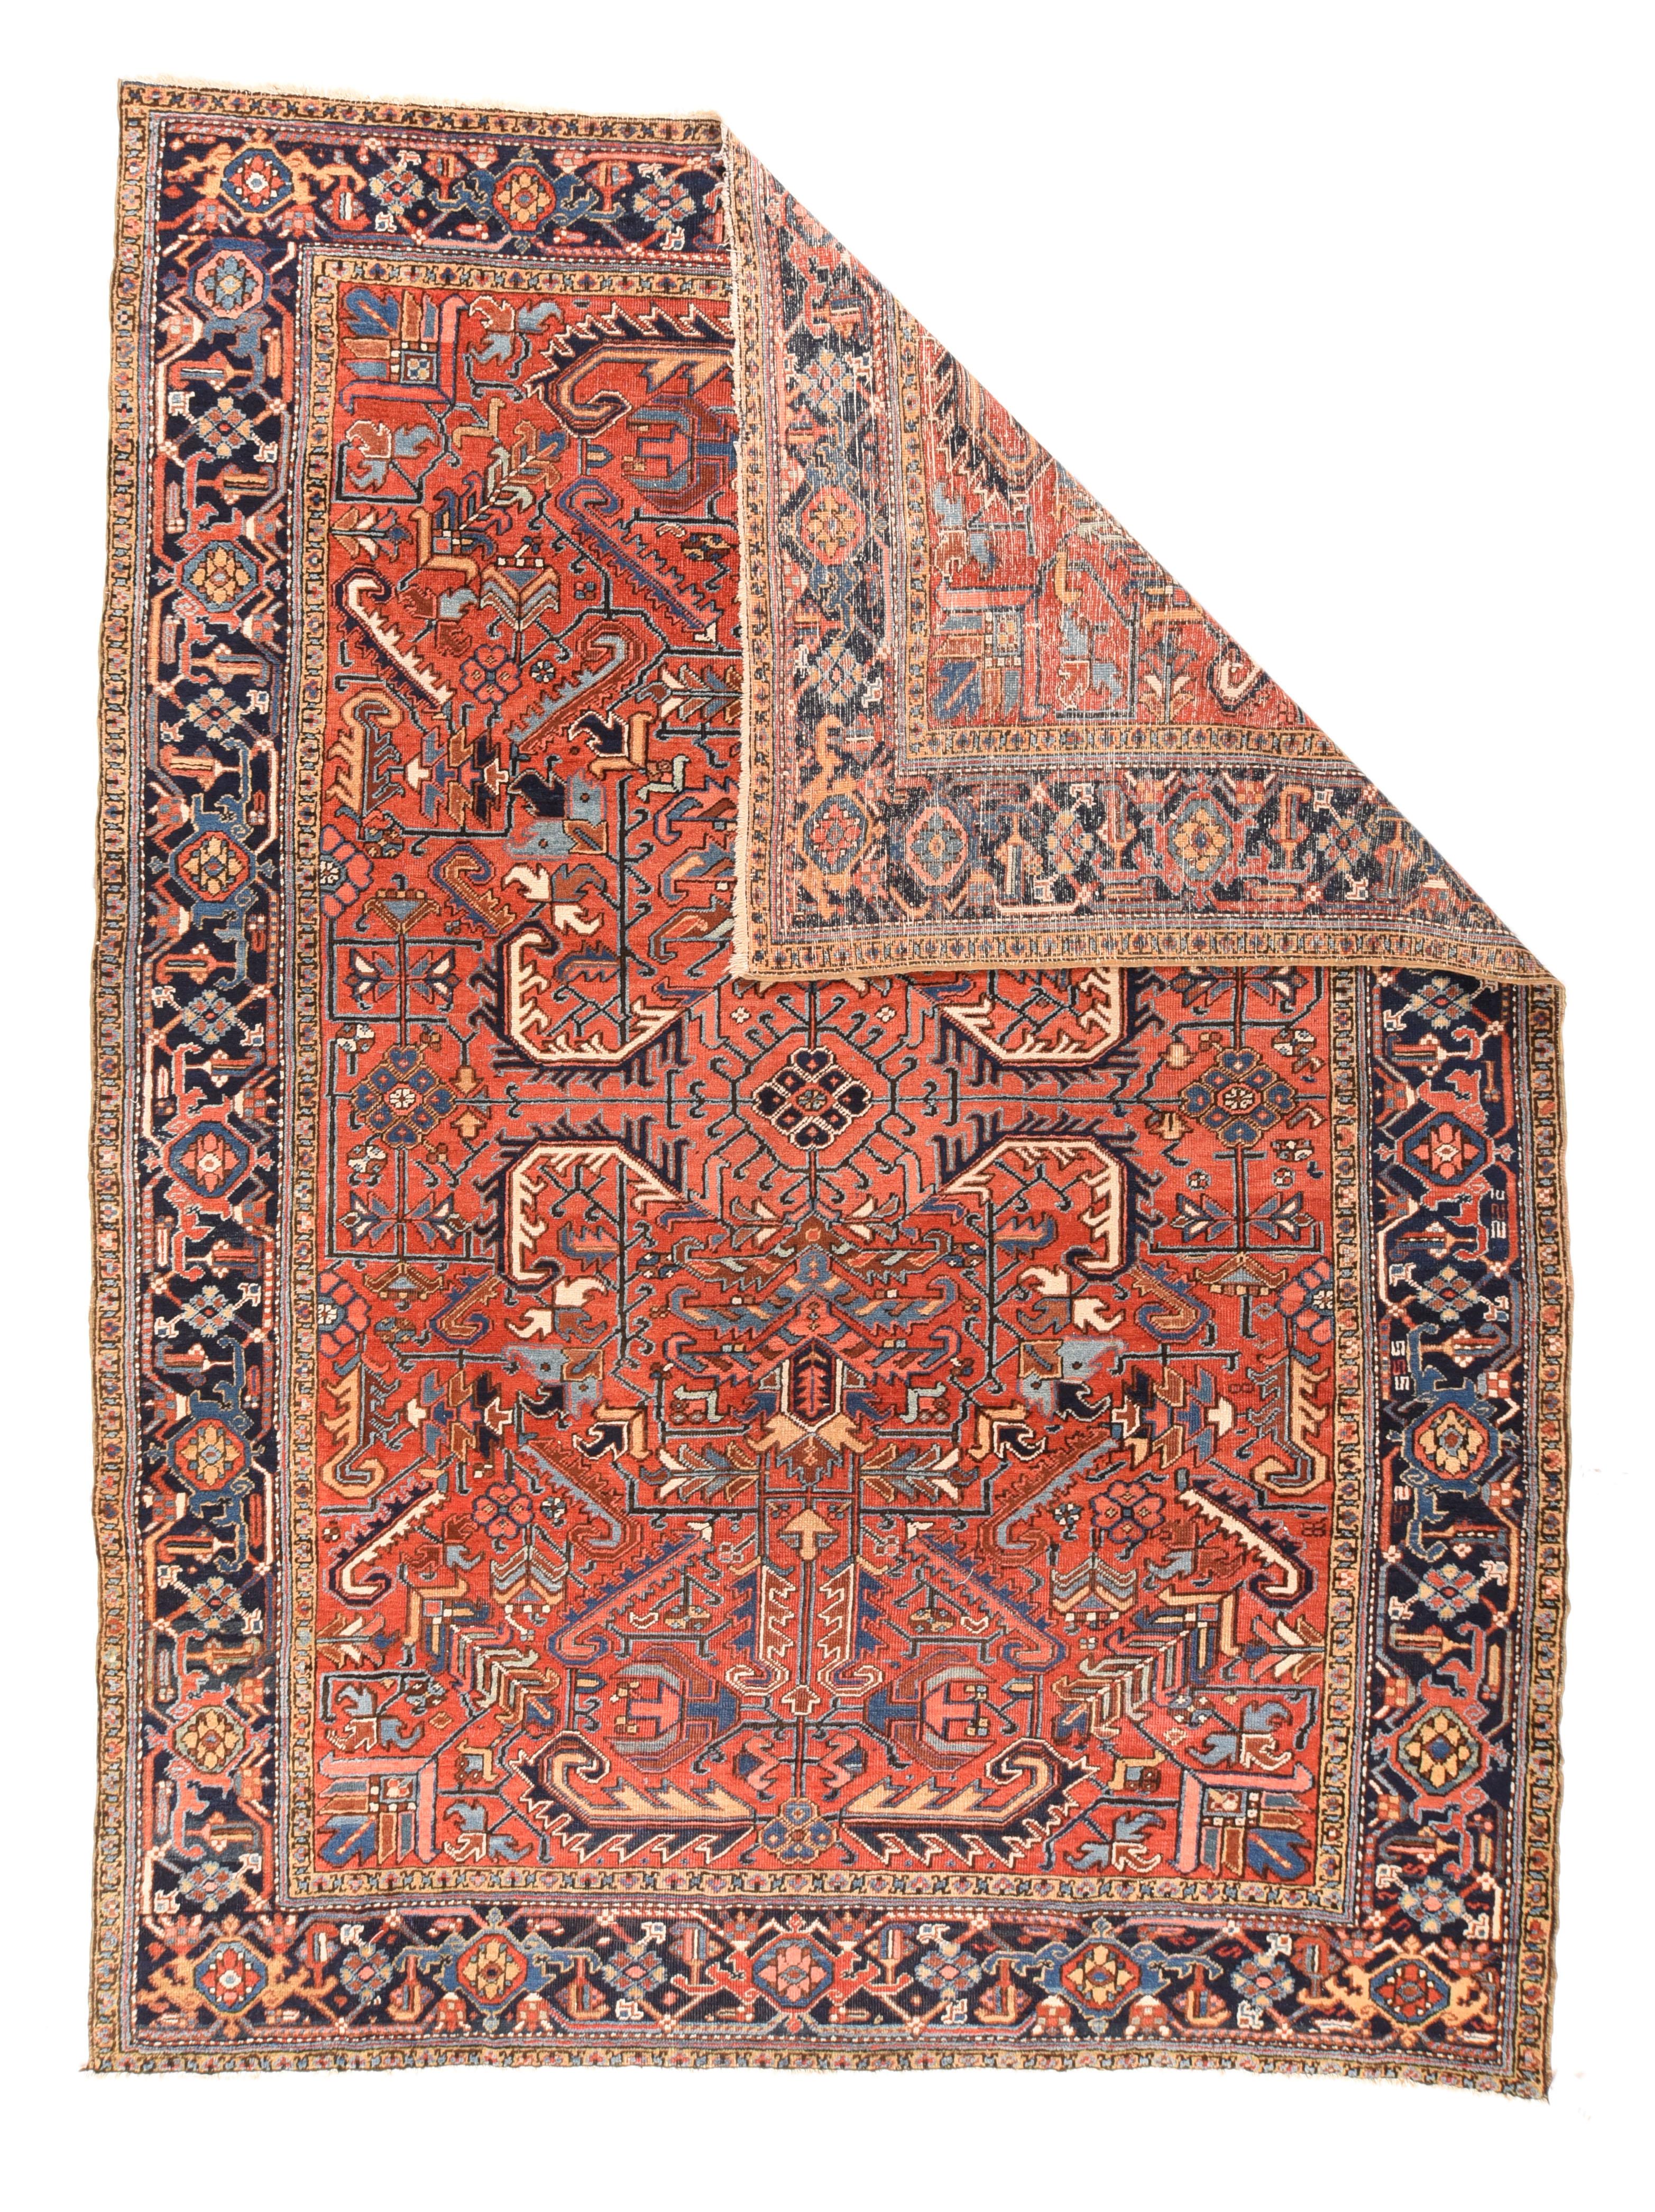 Vintage Persian Heriz Area Rug, hand knotted, circa 1900.
  